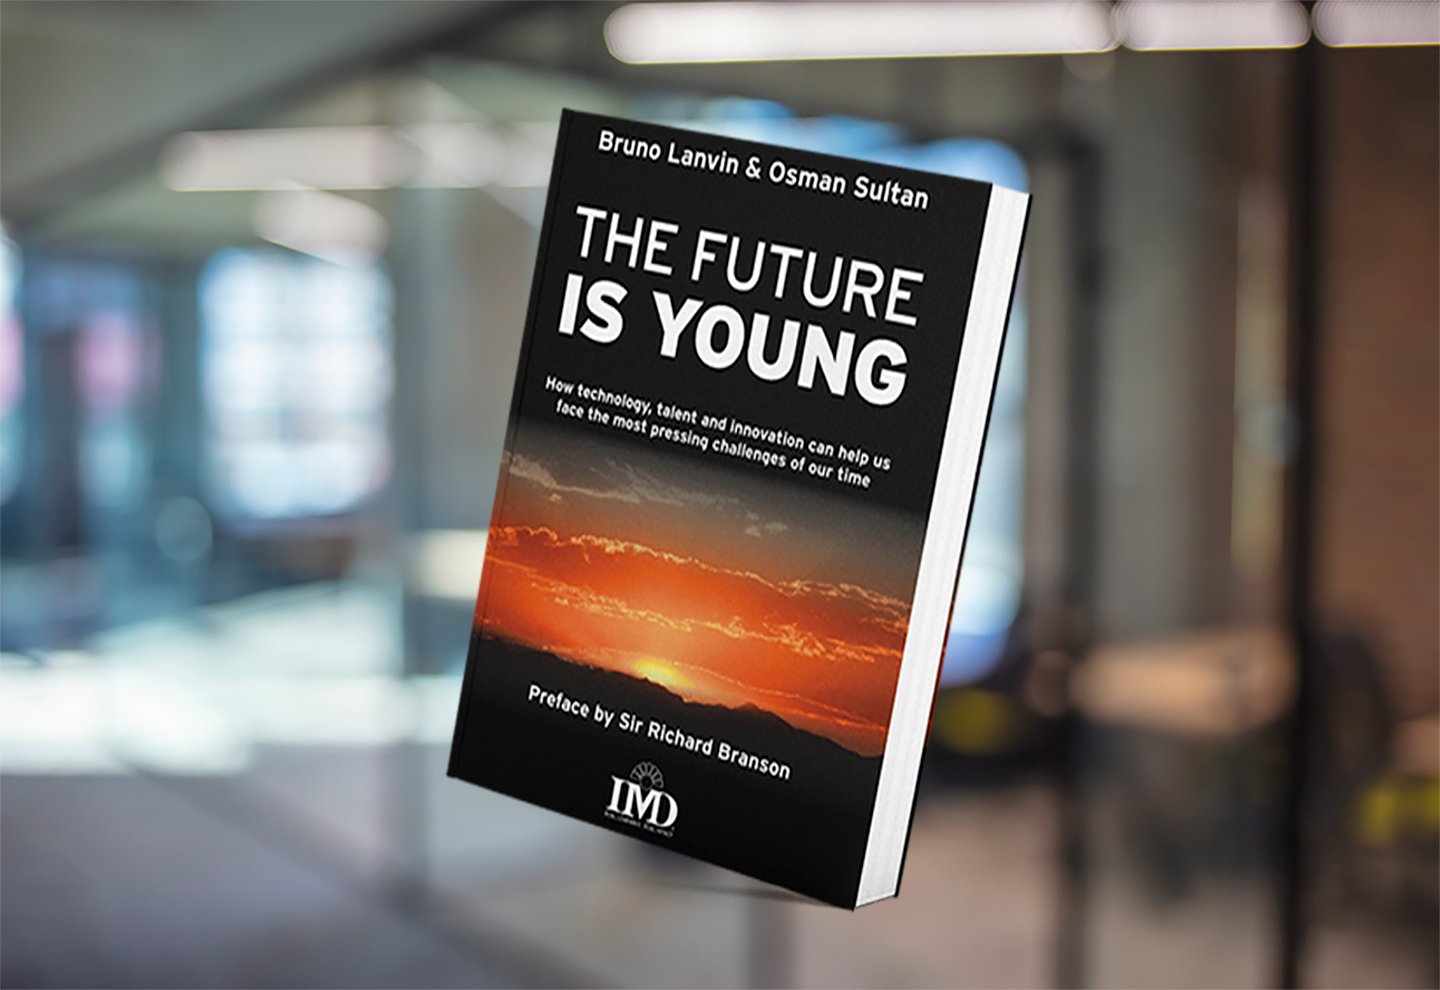 The future is young: How technology, talent and innovation can help us face the most pressing challenges of our time